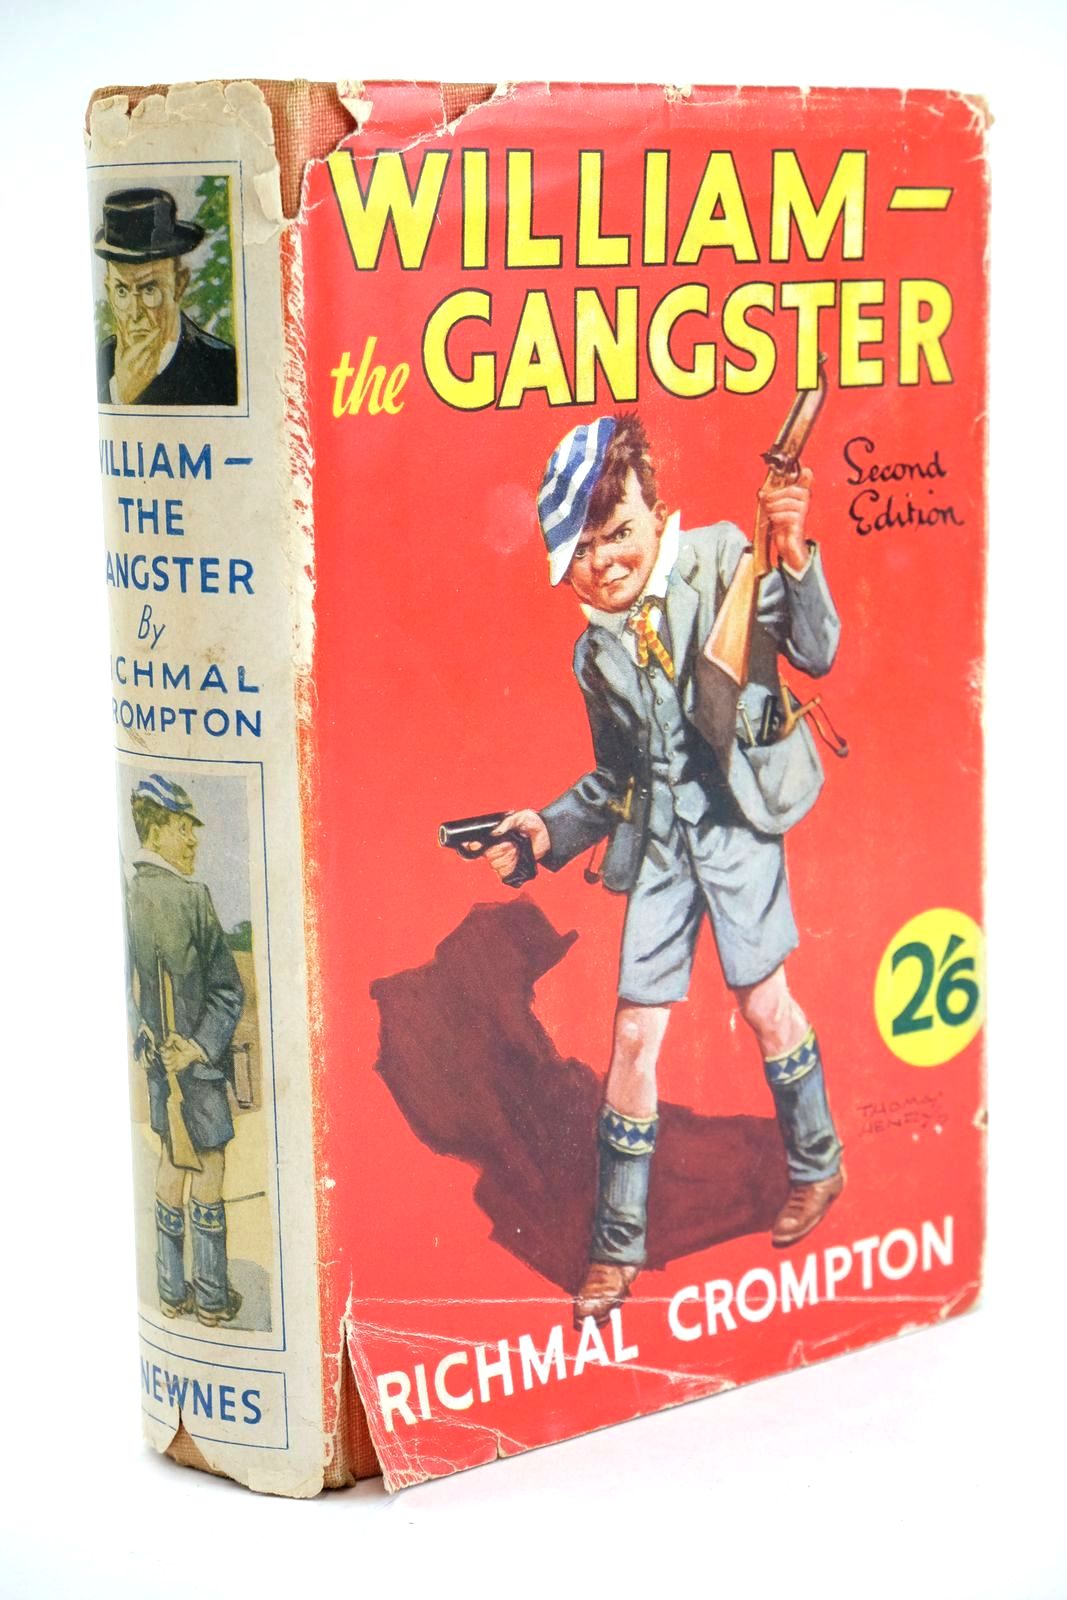 Photo of WILLIAM THE GANGSTER written by Crompton, Richmal illustrated by Henry, Thomas published by George Newnes Ltd. (STOCK CODE: 1324569)  for sale by Stella & Rose's Books